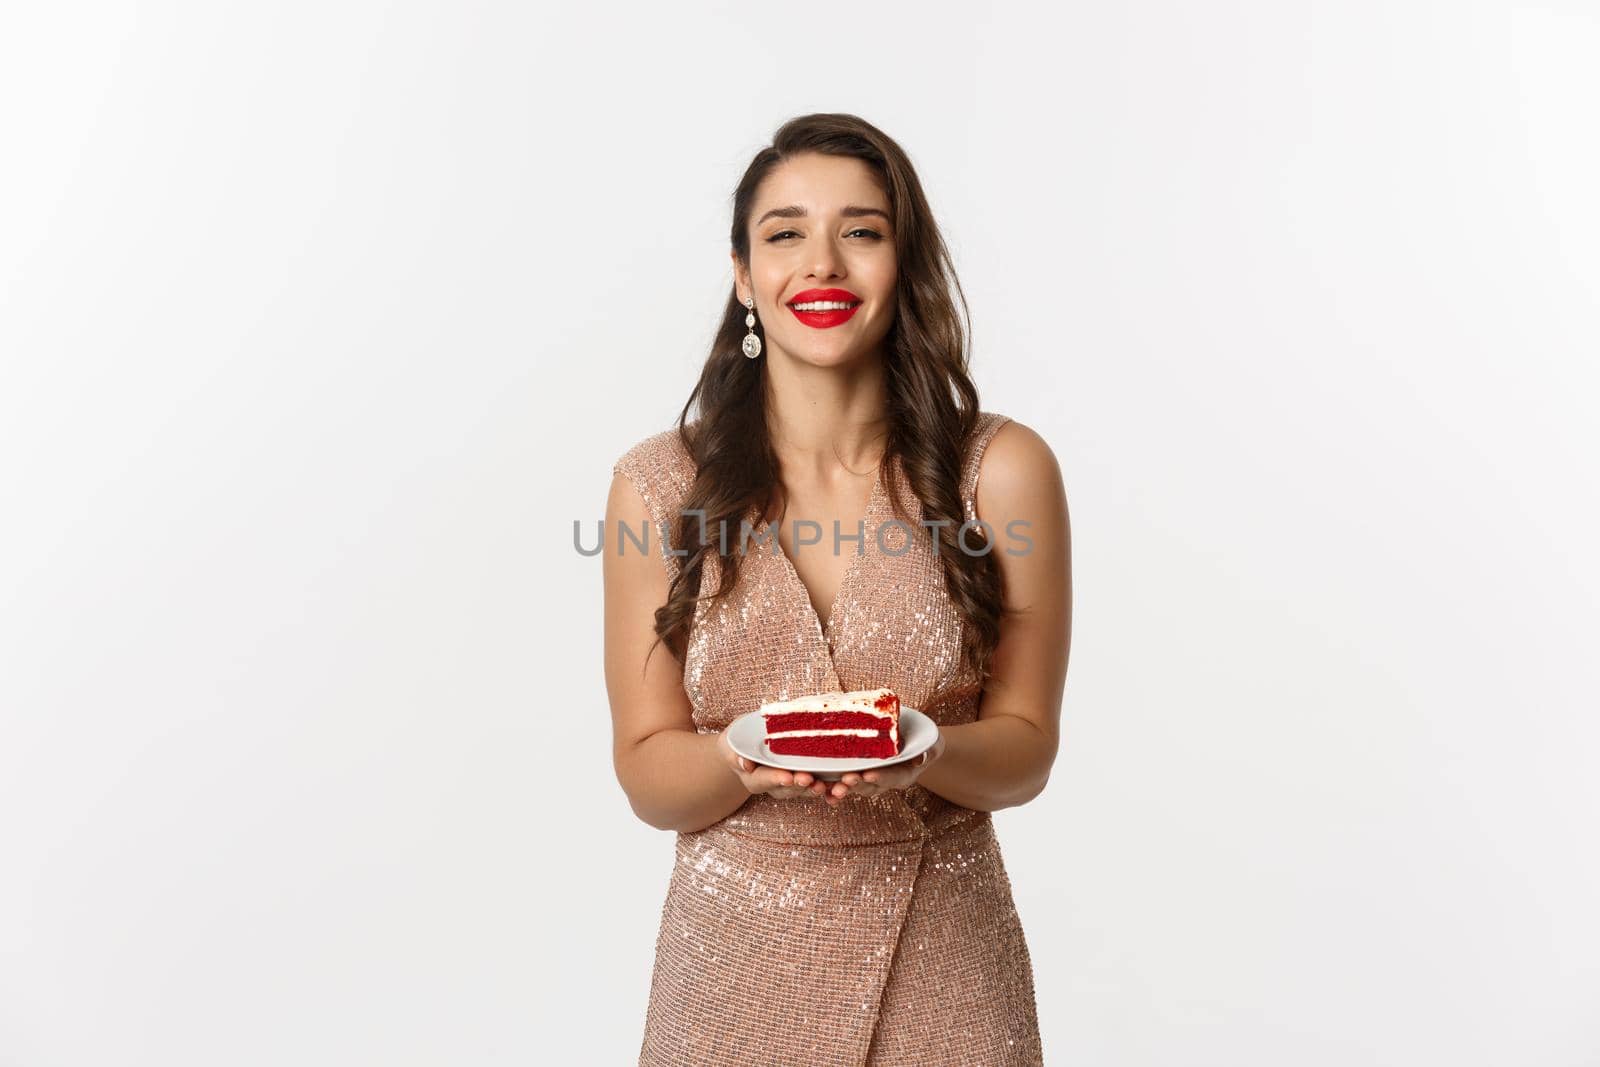 Party and celebration concept. Attractive woman in elegant dress holding delicious cake and smiling with temptation, standing over white background.